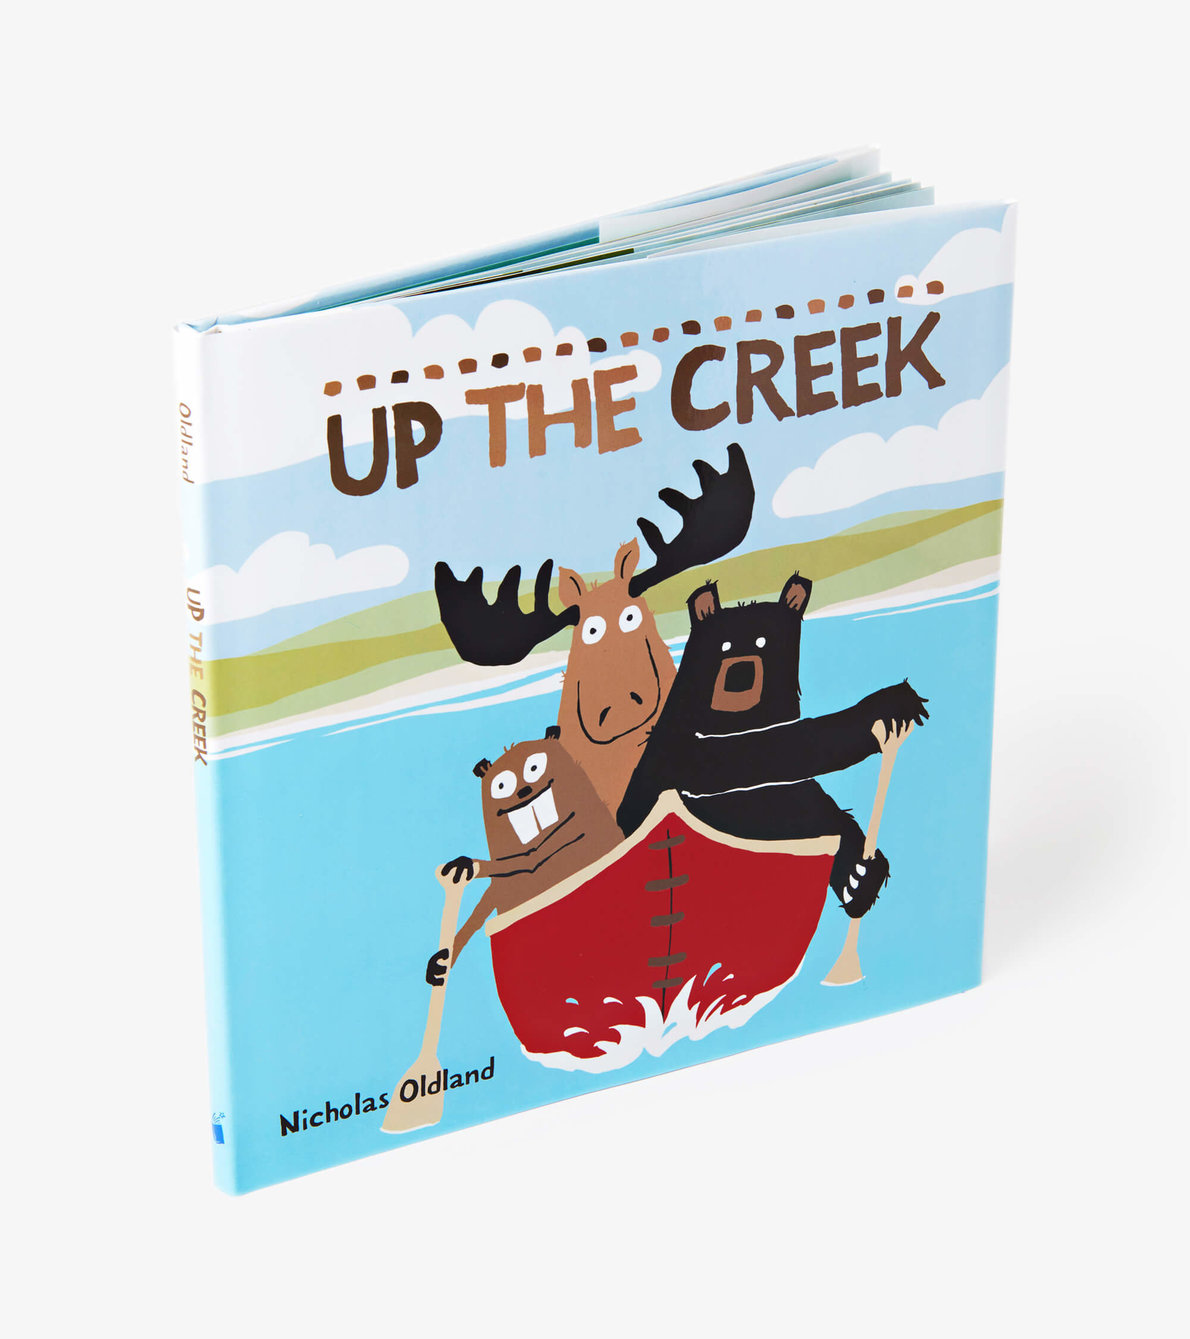 View larger image of "Up The Creek" Children's Book